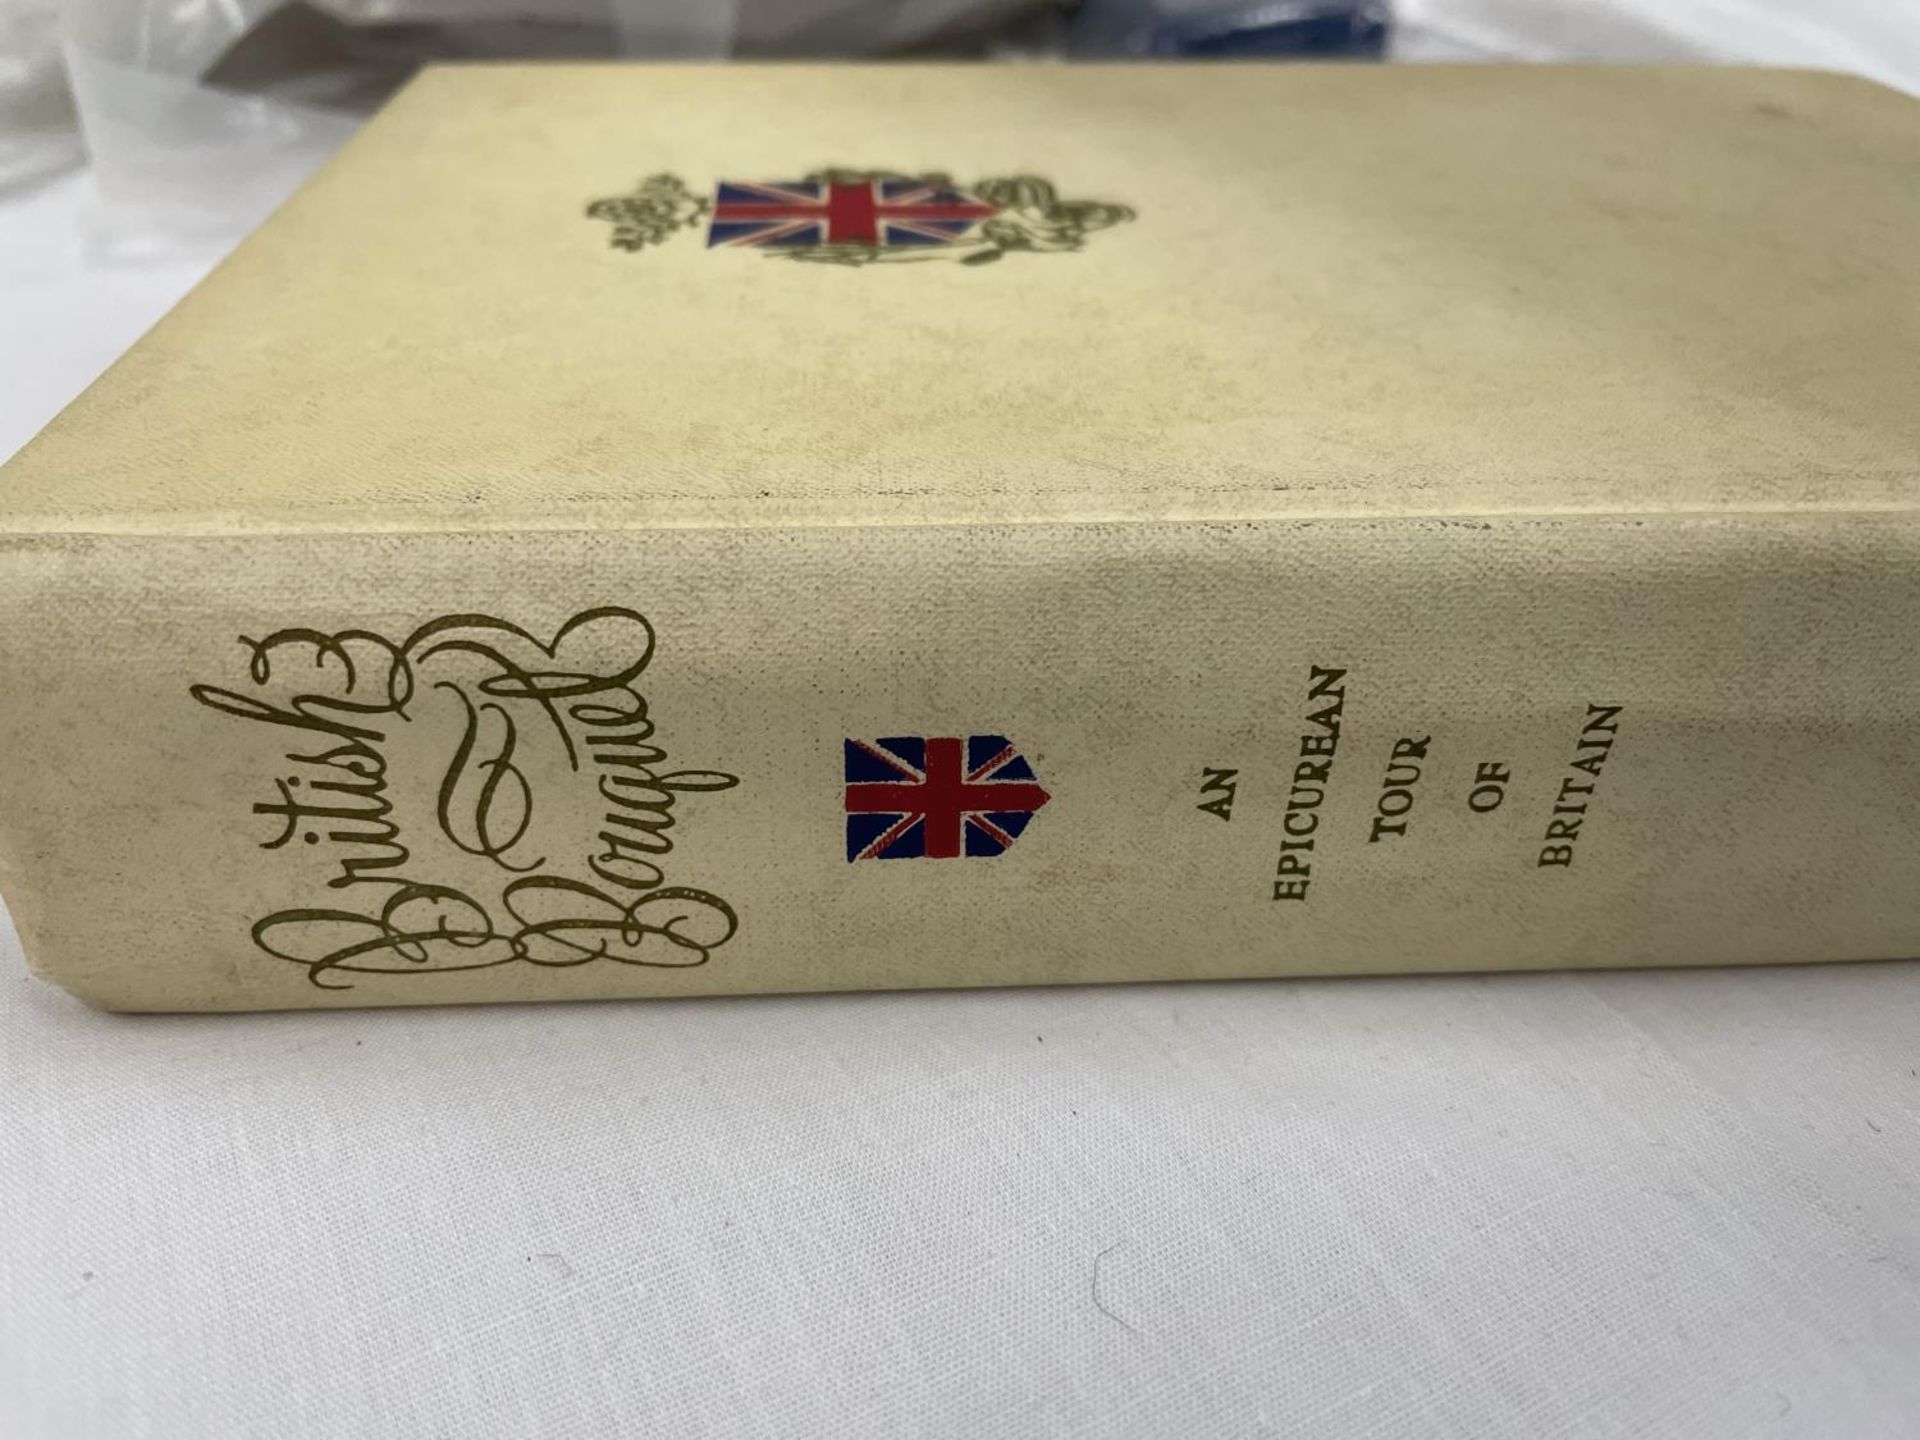 A FIRST EDITION BRITISH BOUQUET AN EPICURIAN TOUR OF BRITIAN BY SAMUEL CHAMBERLAIN - Image 2 of 4